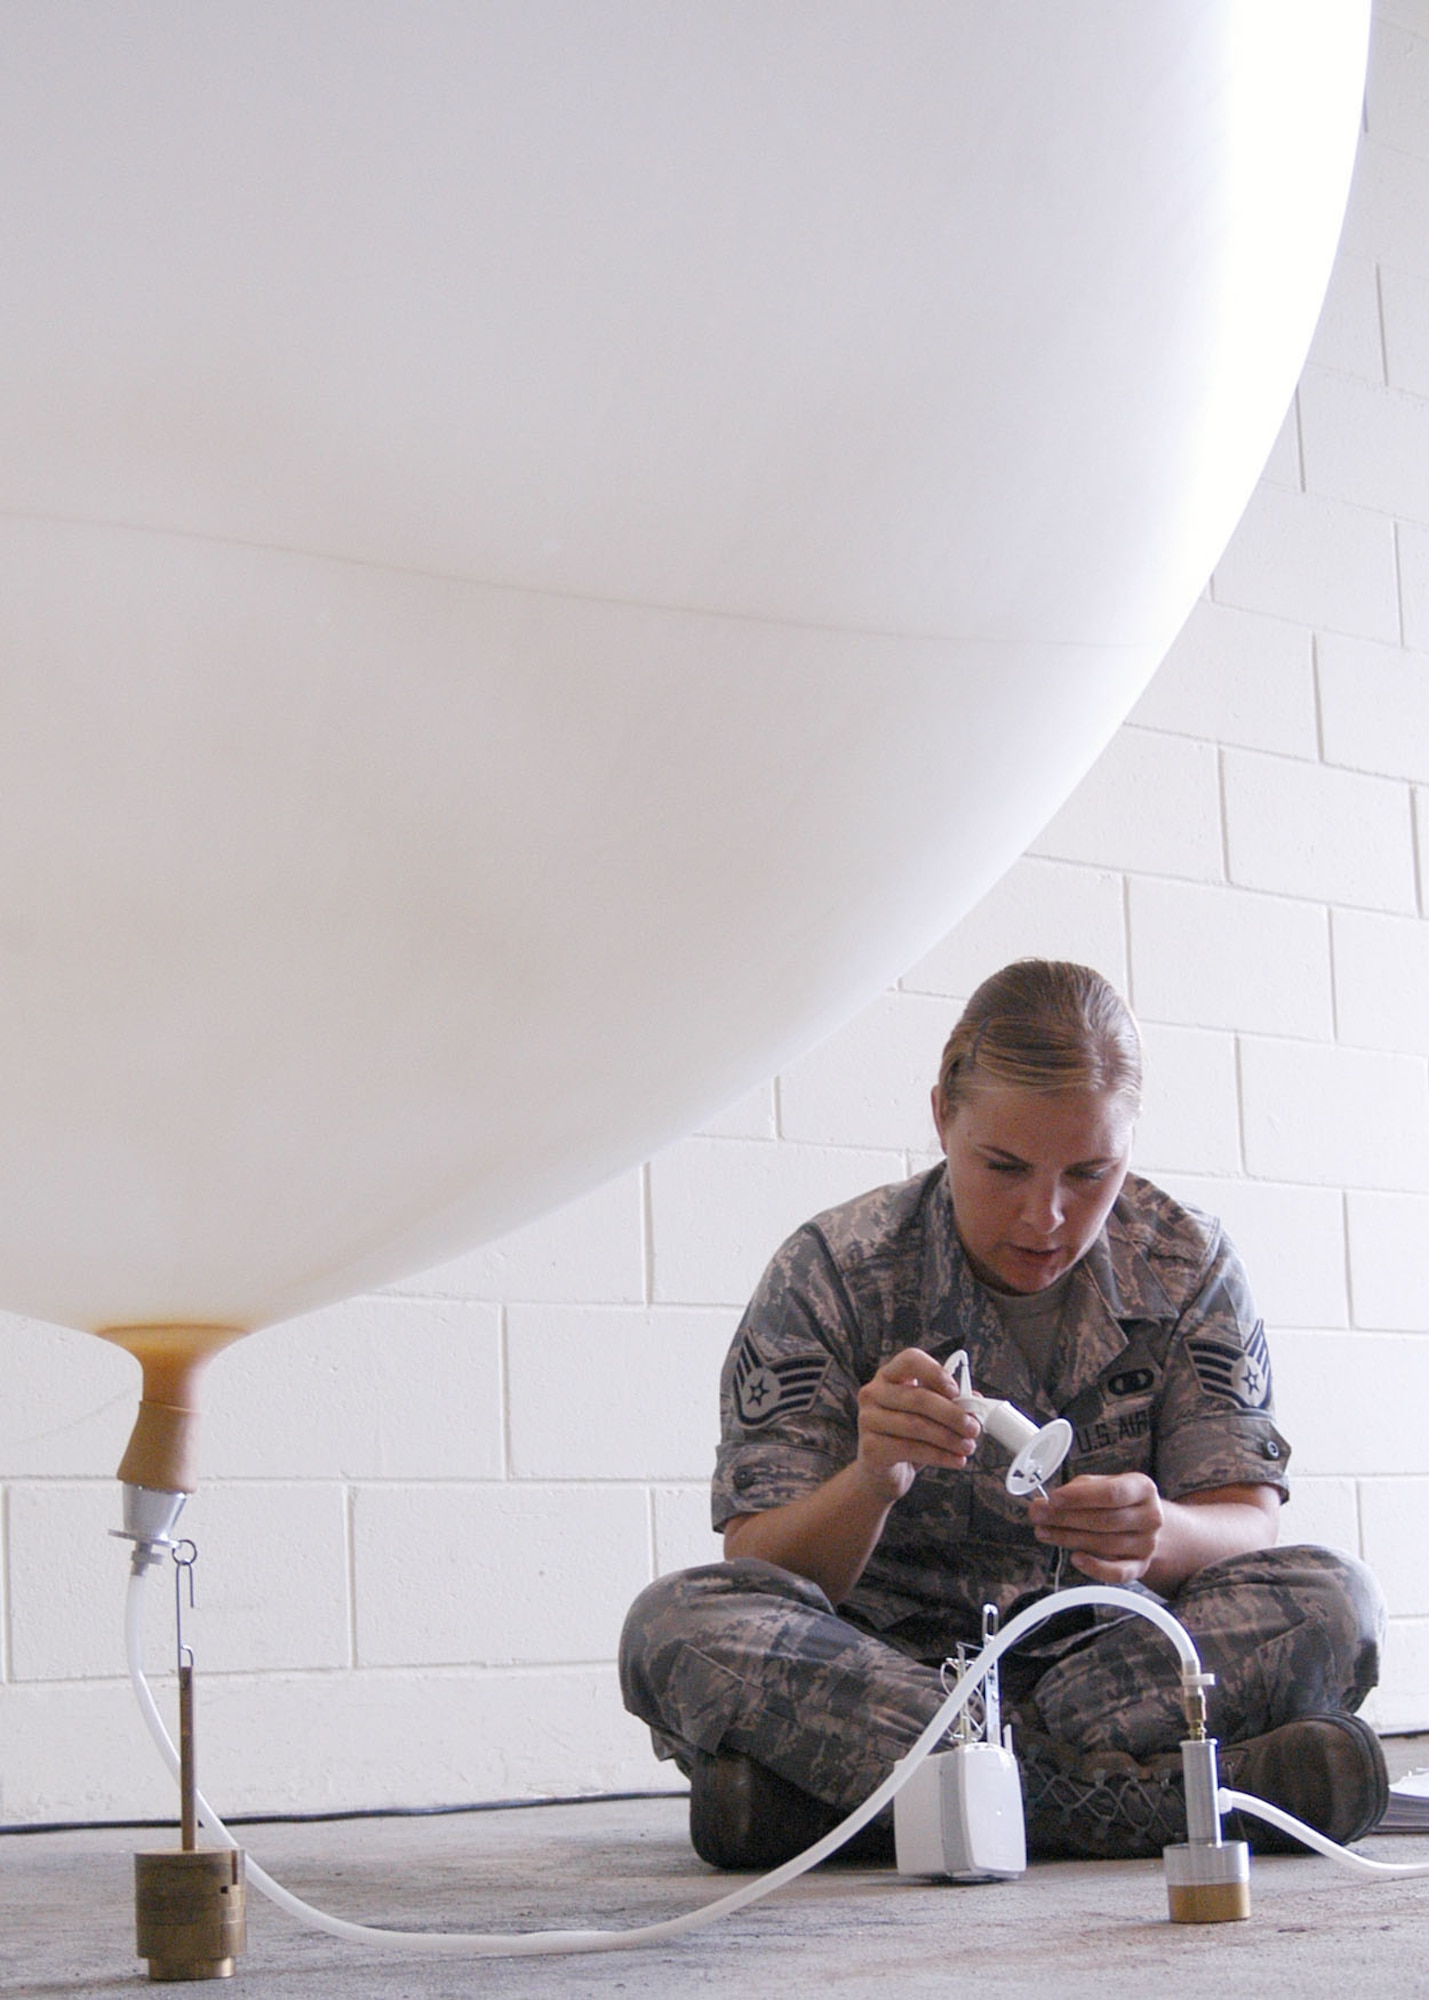 KADENA AIR BASE, Japan -- Staff Sgt. Sara Klobucar, 353rd Operations Support Squadron weather technician, prepares a radiosonde before attaching it to a helium-filled weather balloon here Oct. 27. The radiosonde measures pressure, temperature and relative humidity as it ascends into the atmosphere; and sends the data back to the MW31 sounding system every one to two seconds. The data provides valuable input for computer forecast models, local forecasts and future weather research.  (U.S. Air Force photo by Tech. Sgt. Aaron Cram)                                